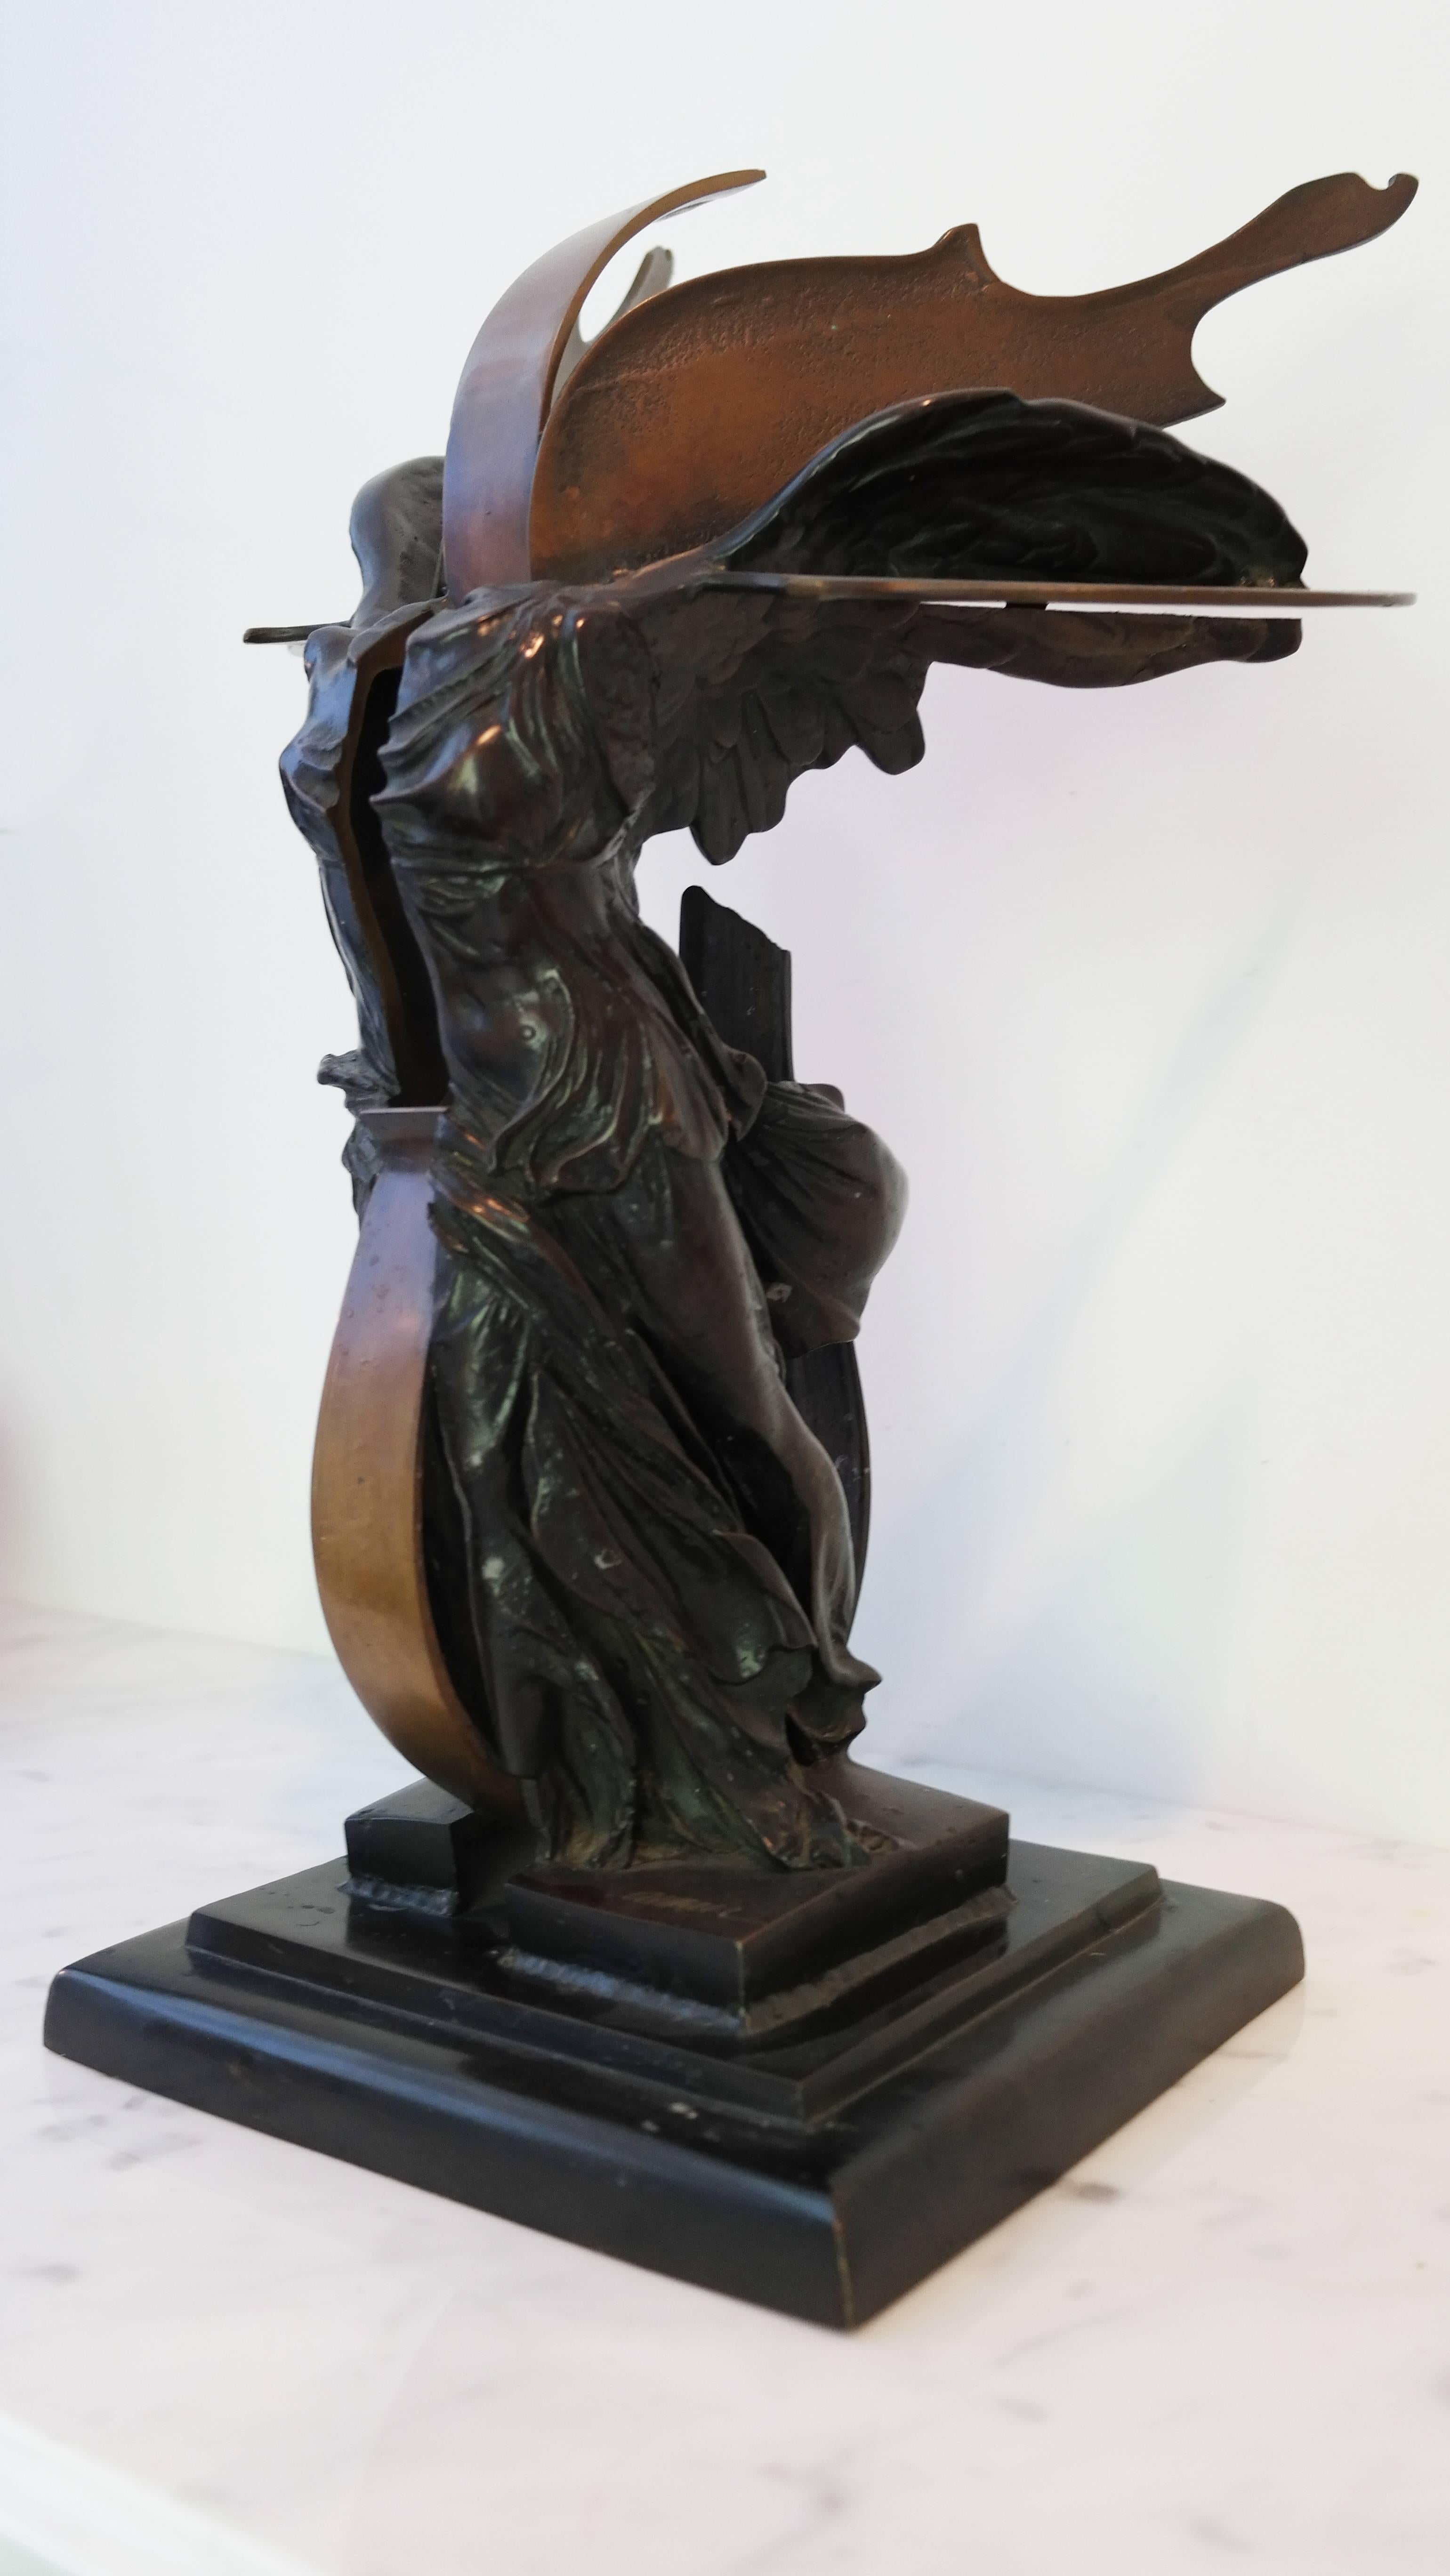 Arman
Angel and Violin
1990
Bronze, signed and numbered
Edition of 50
17 x 10 x 9 inches